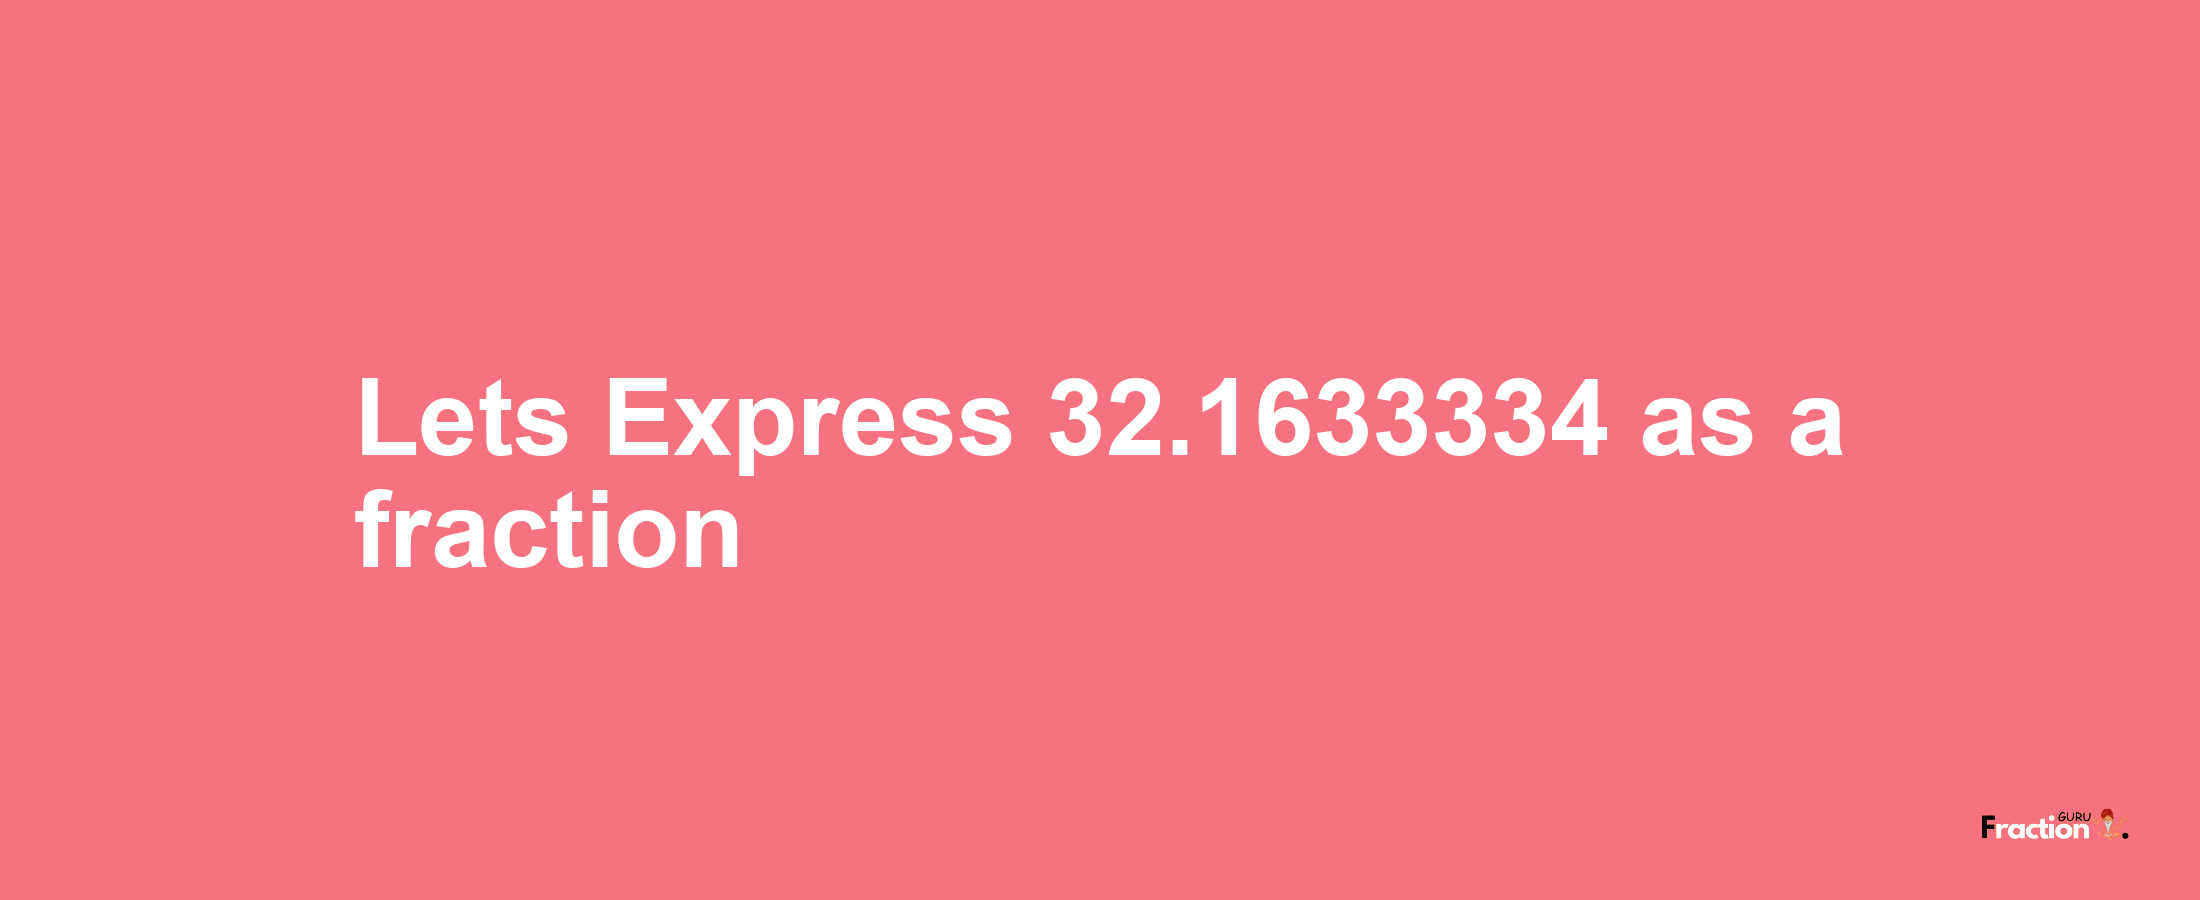 Lets Express 32.1633334 as afraction